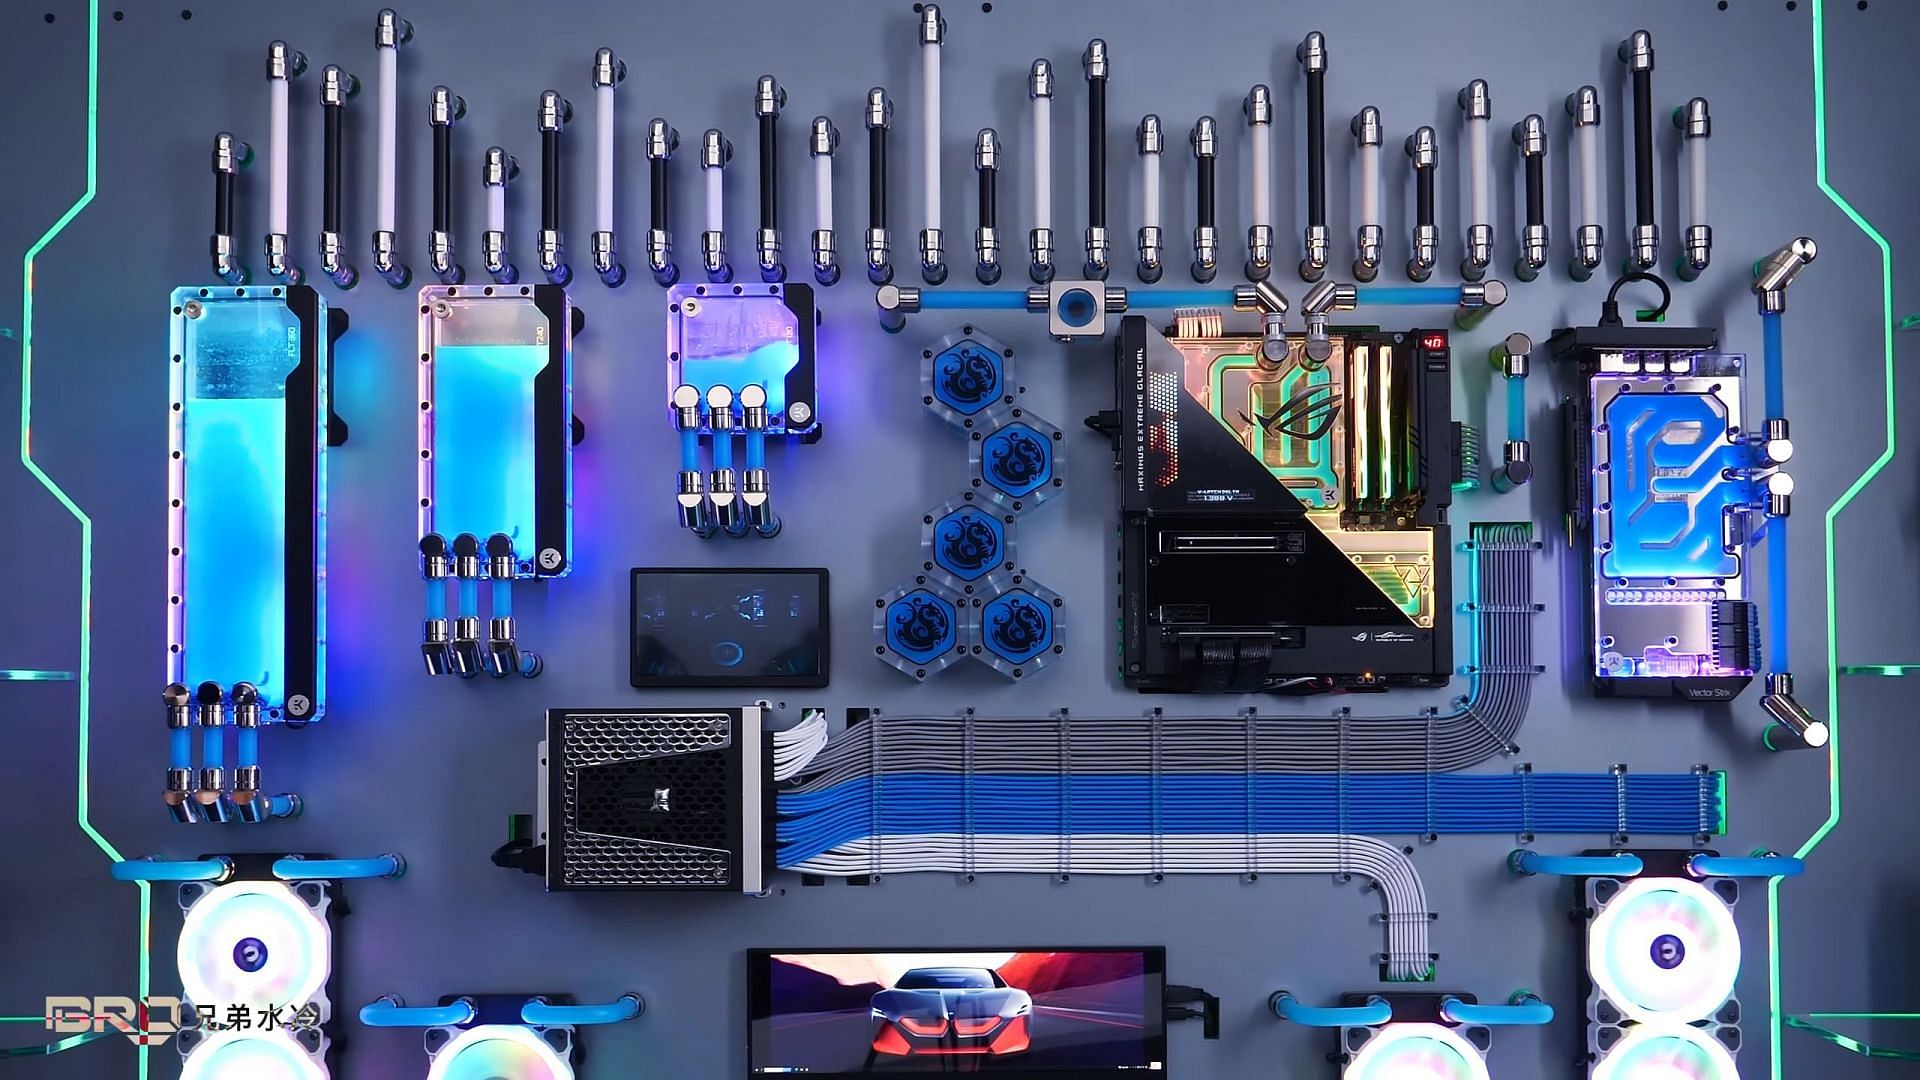 A custom gaming PC mounted openly on the wall (Image via YouTube/Bro Cooling)